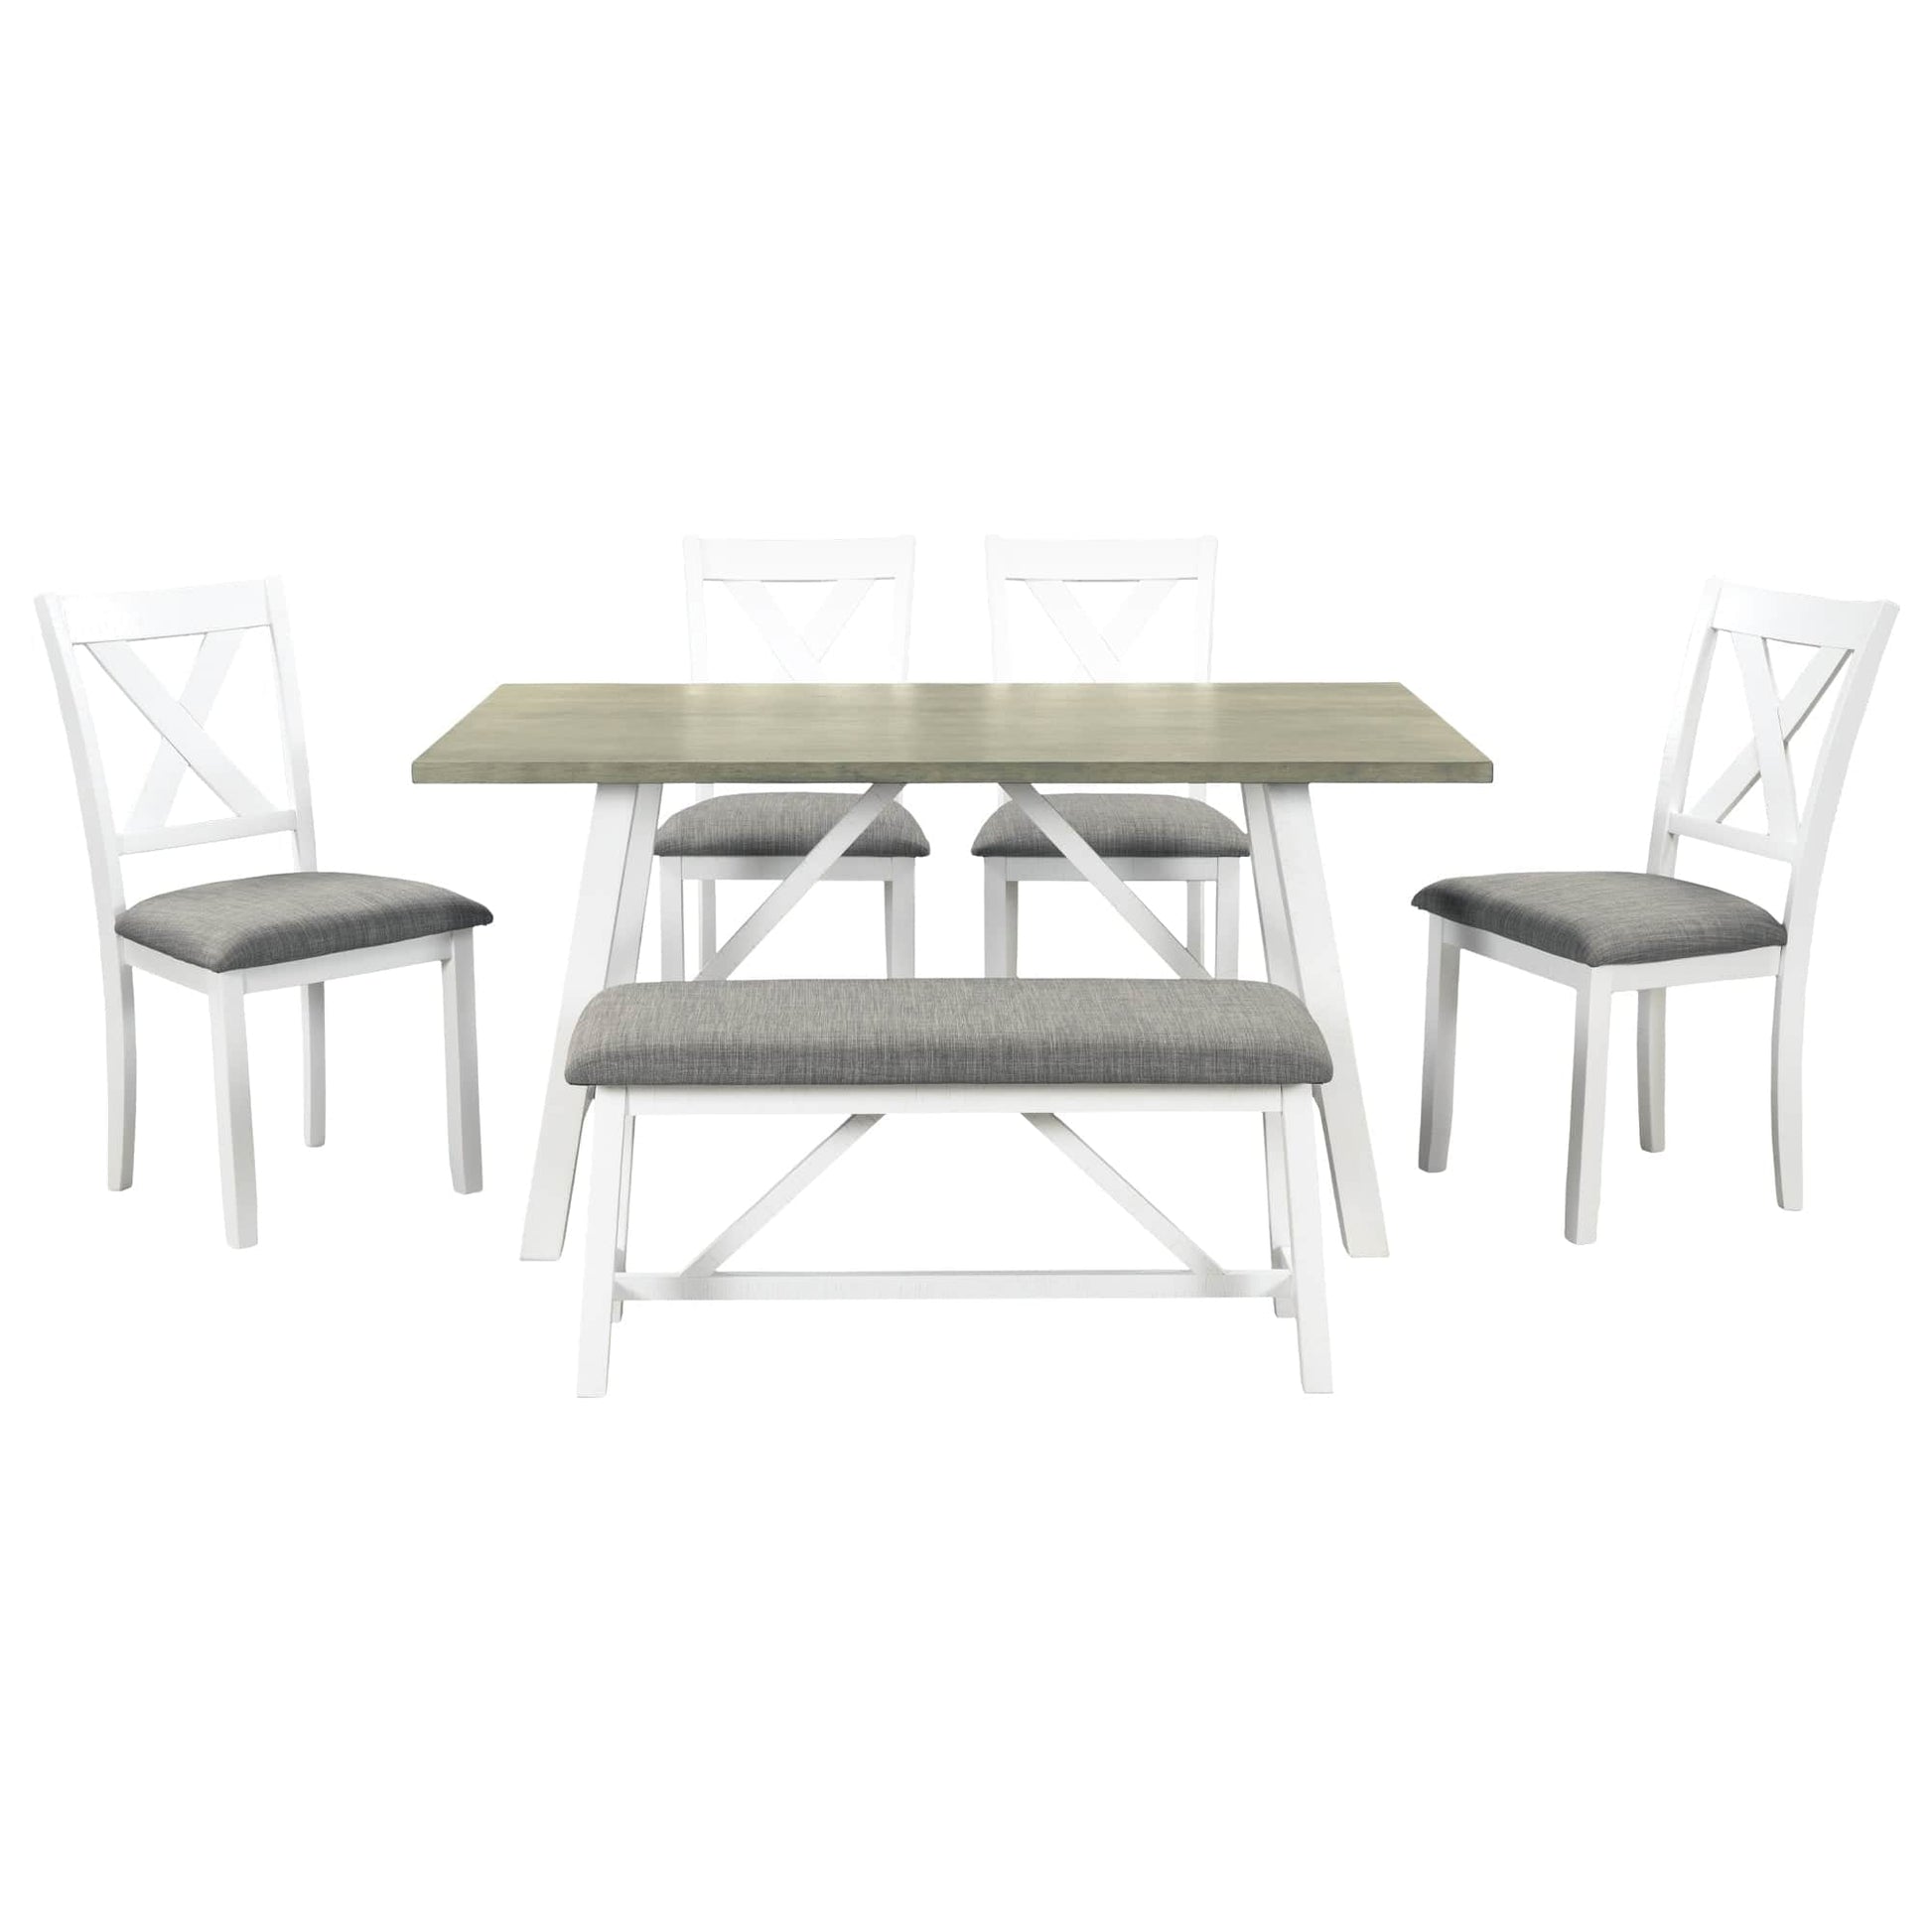 1st Choice Furniture Direct Dining Set 1st Choice 6-Piece Wood White+Gray Dining Set with Bench & Chairs